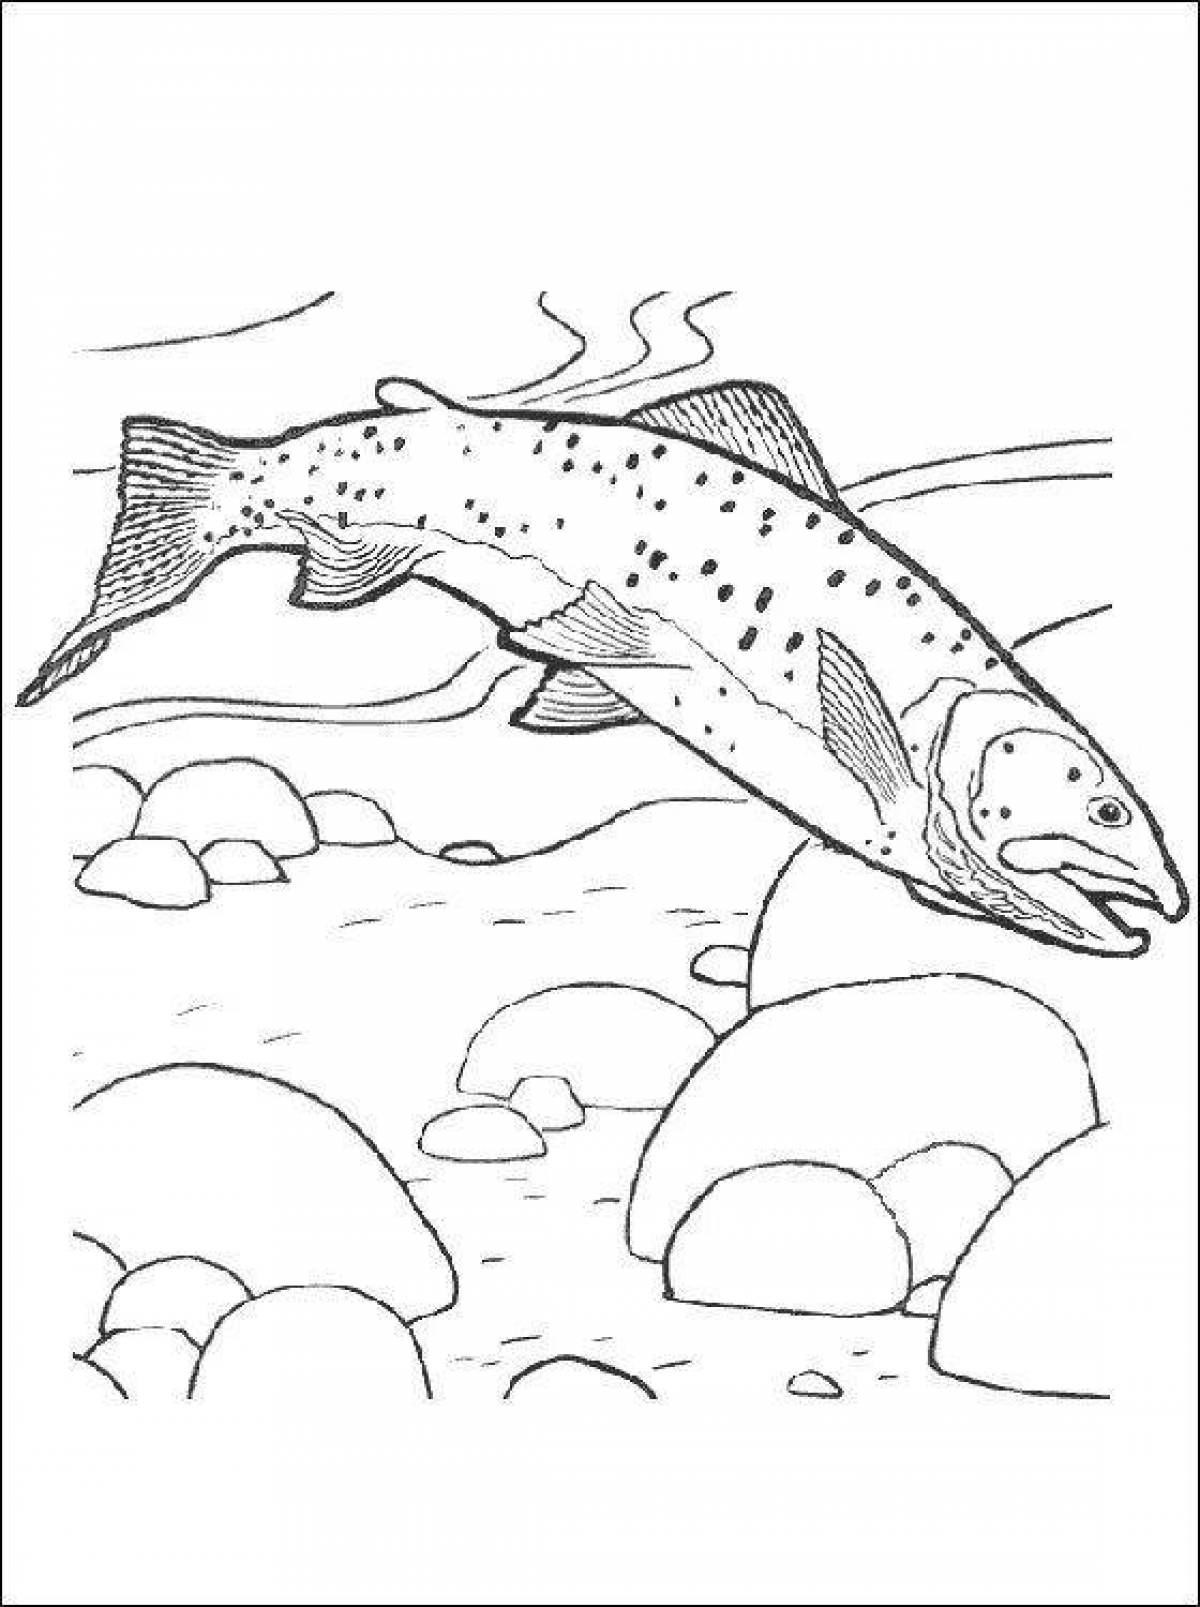 Shiny trout coloring page